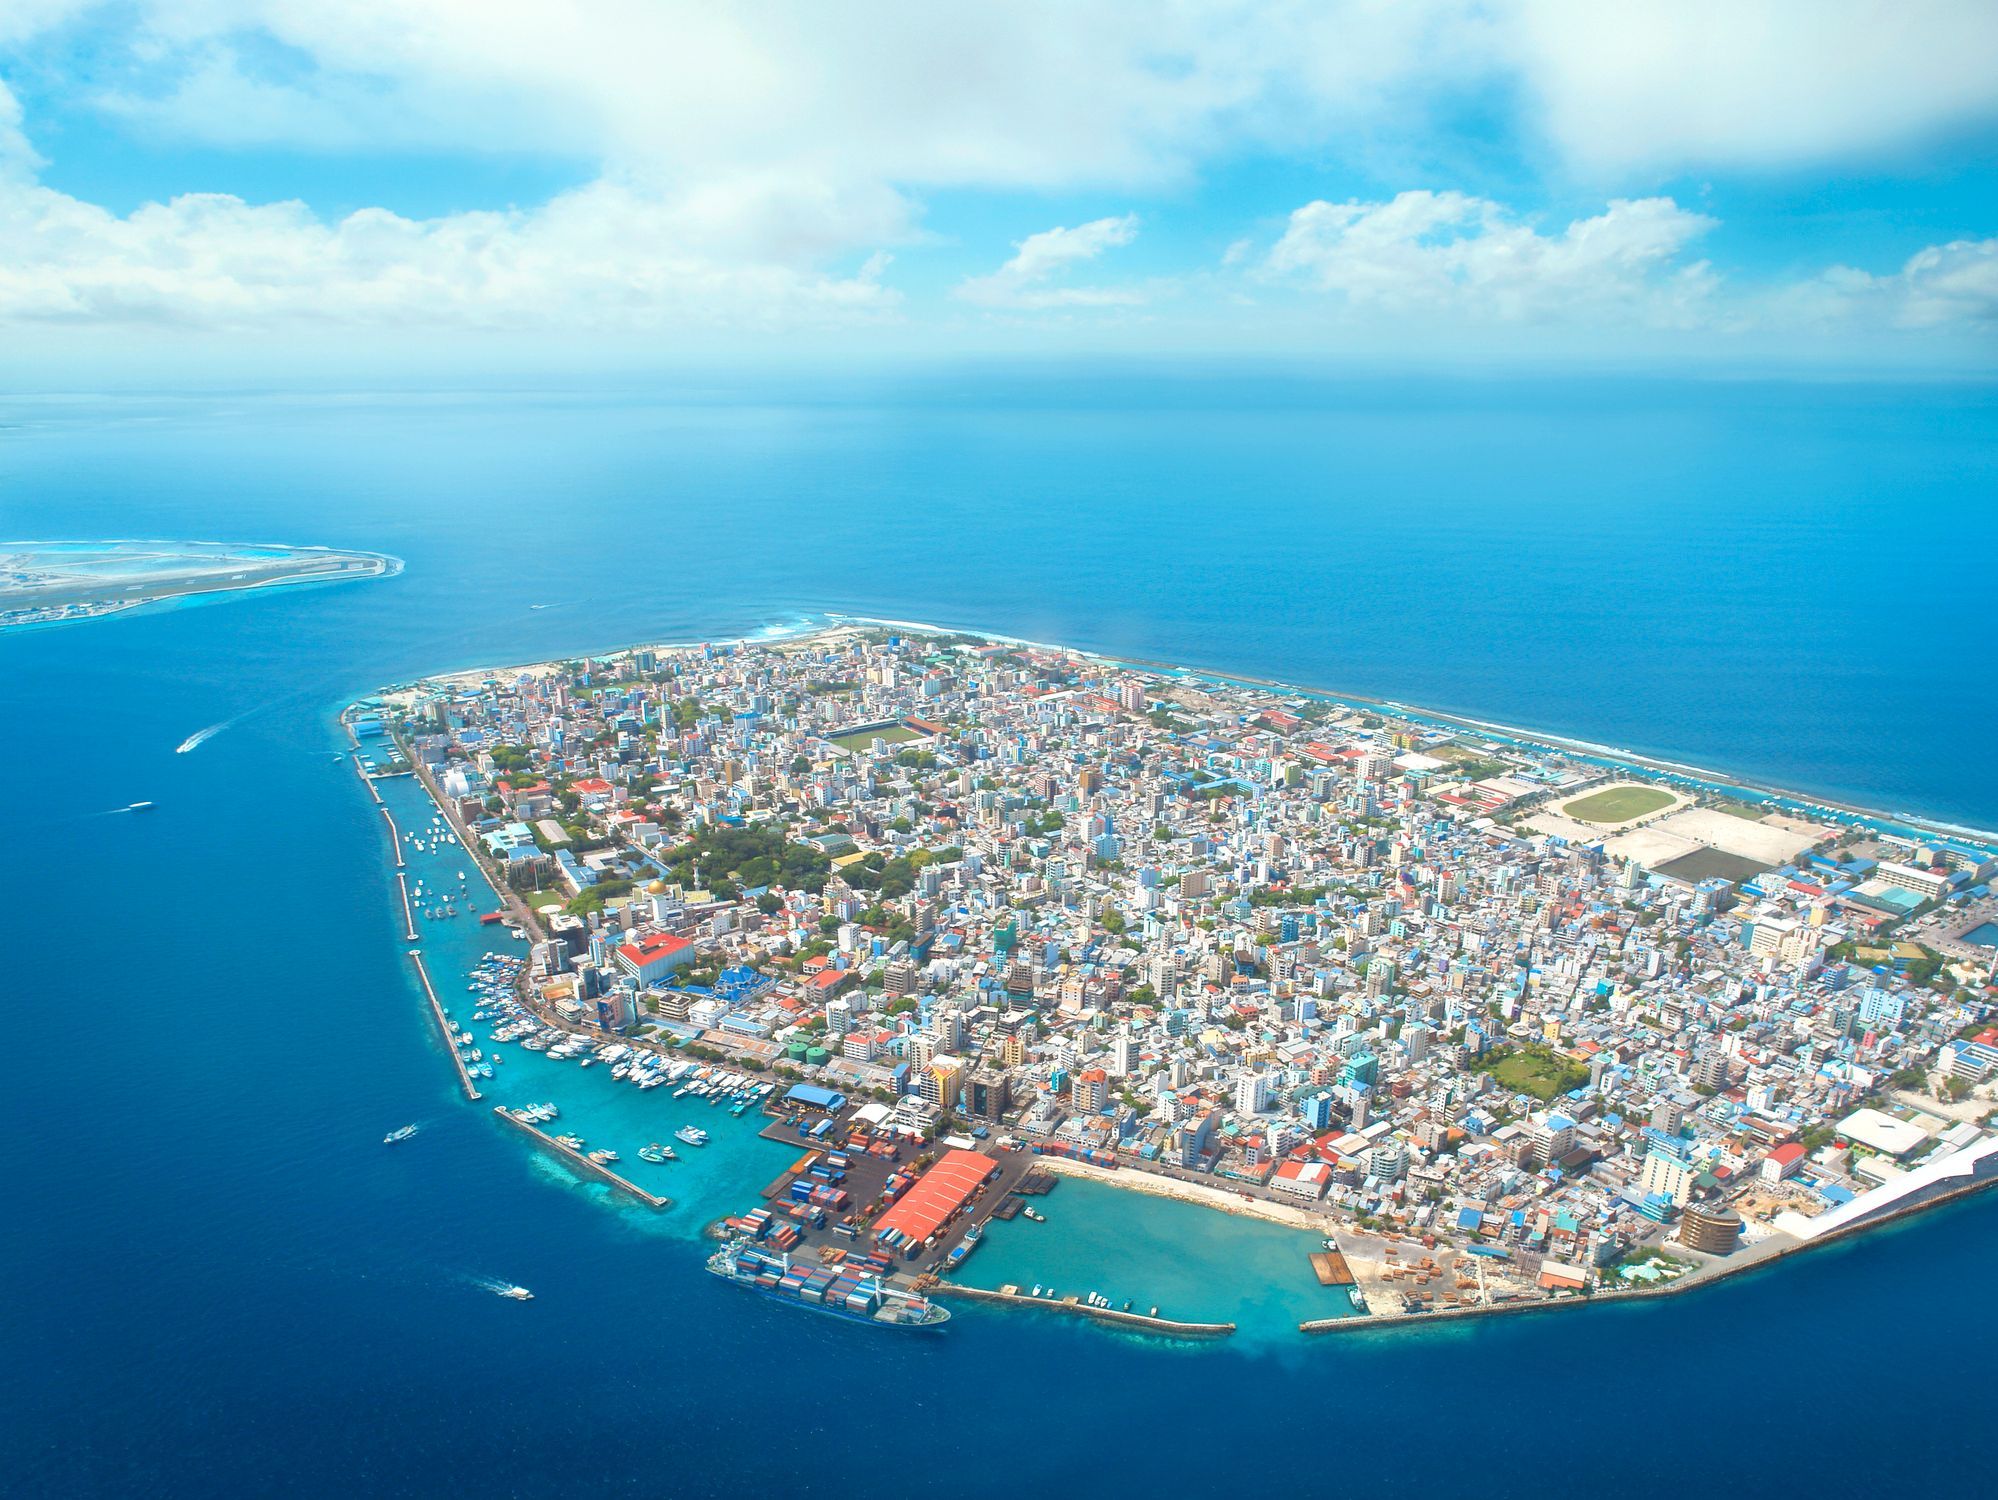 The bustling island of Malé, the capital of the Maldives, where over half the population of the archipelago live.